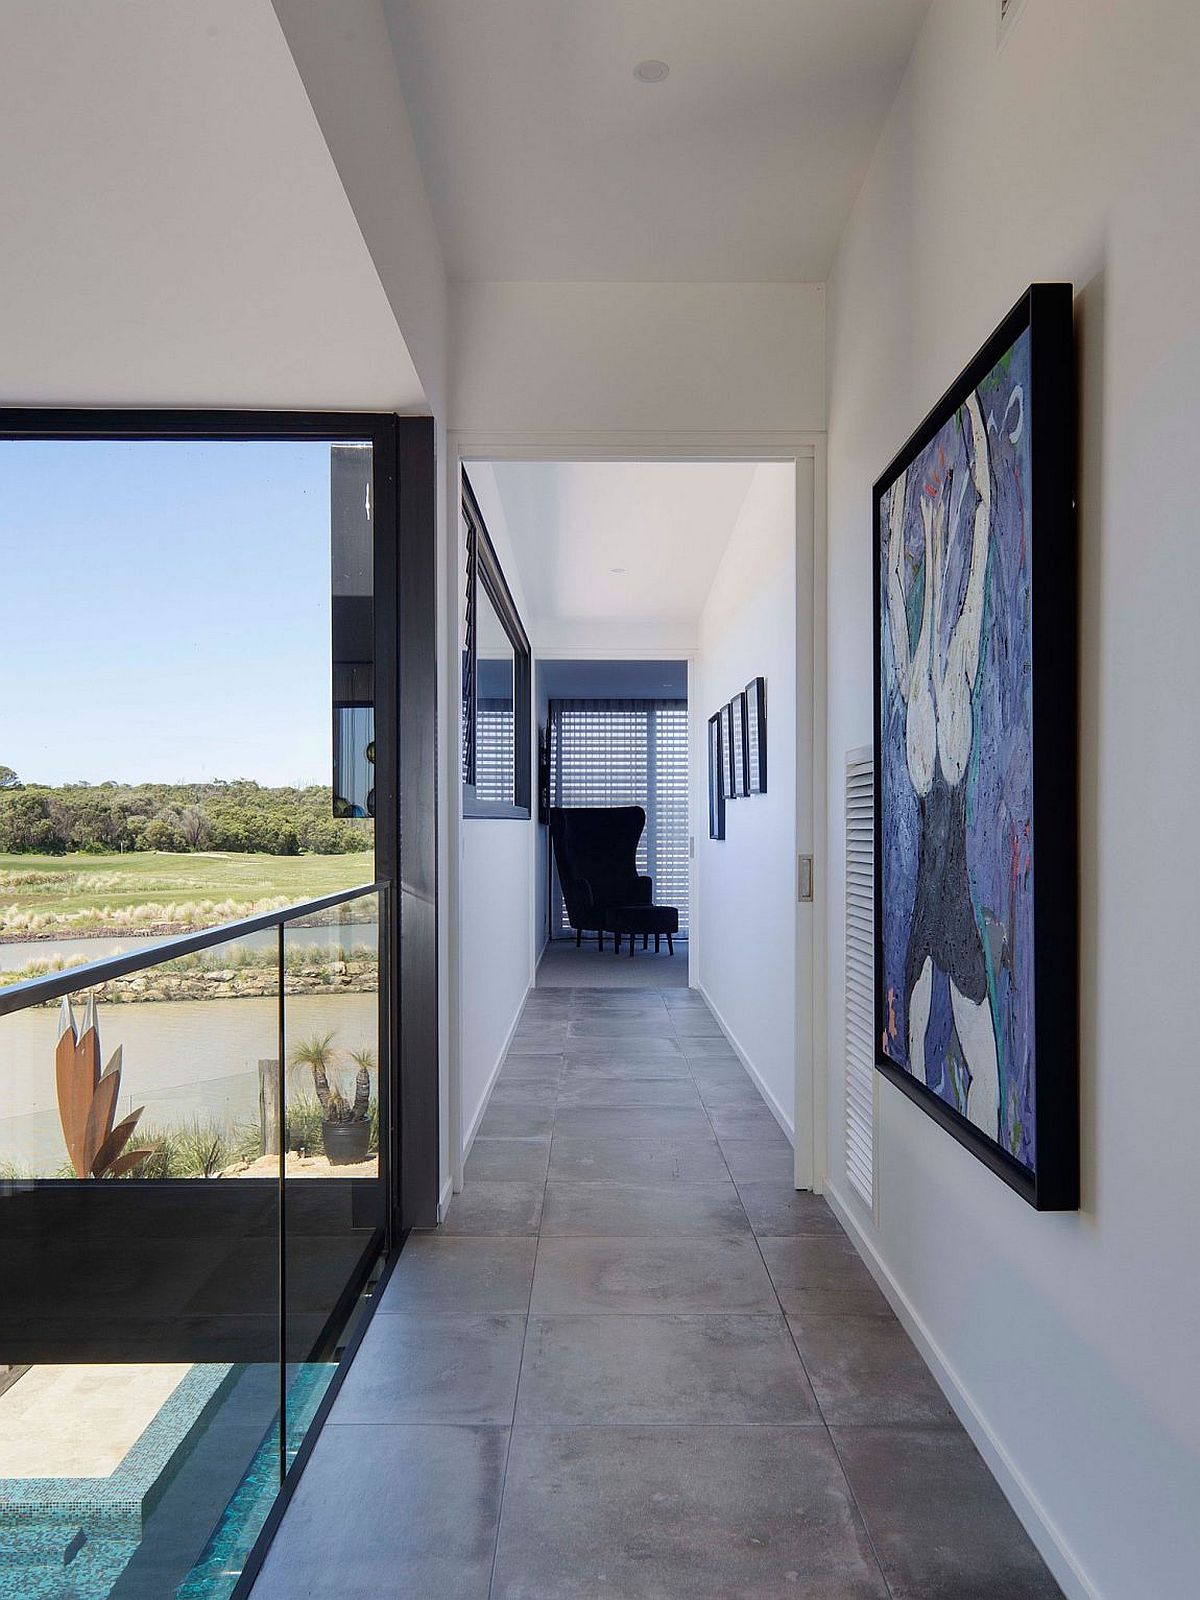 Corridor of the home with a view of the pool and garden below